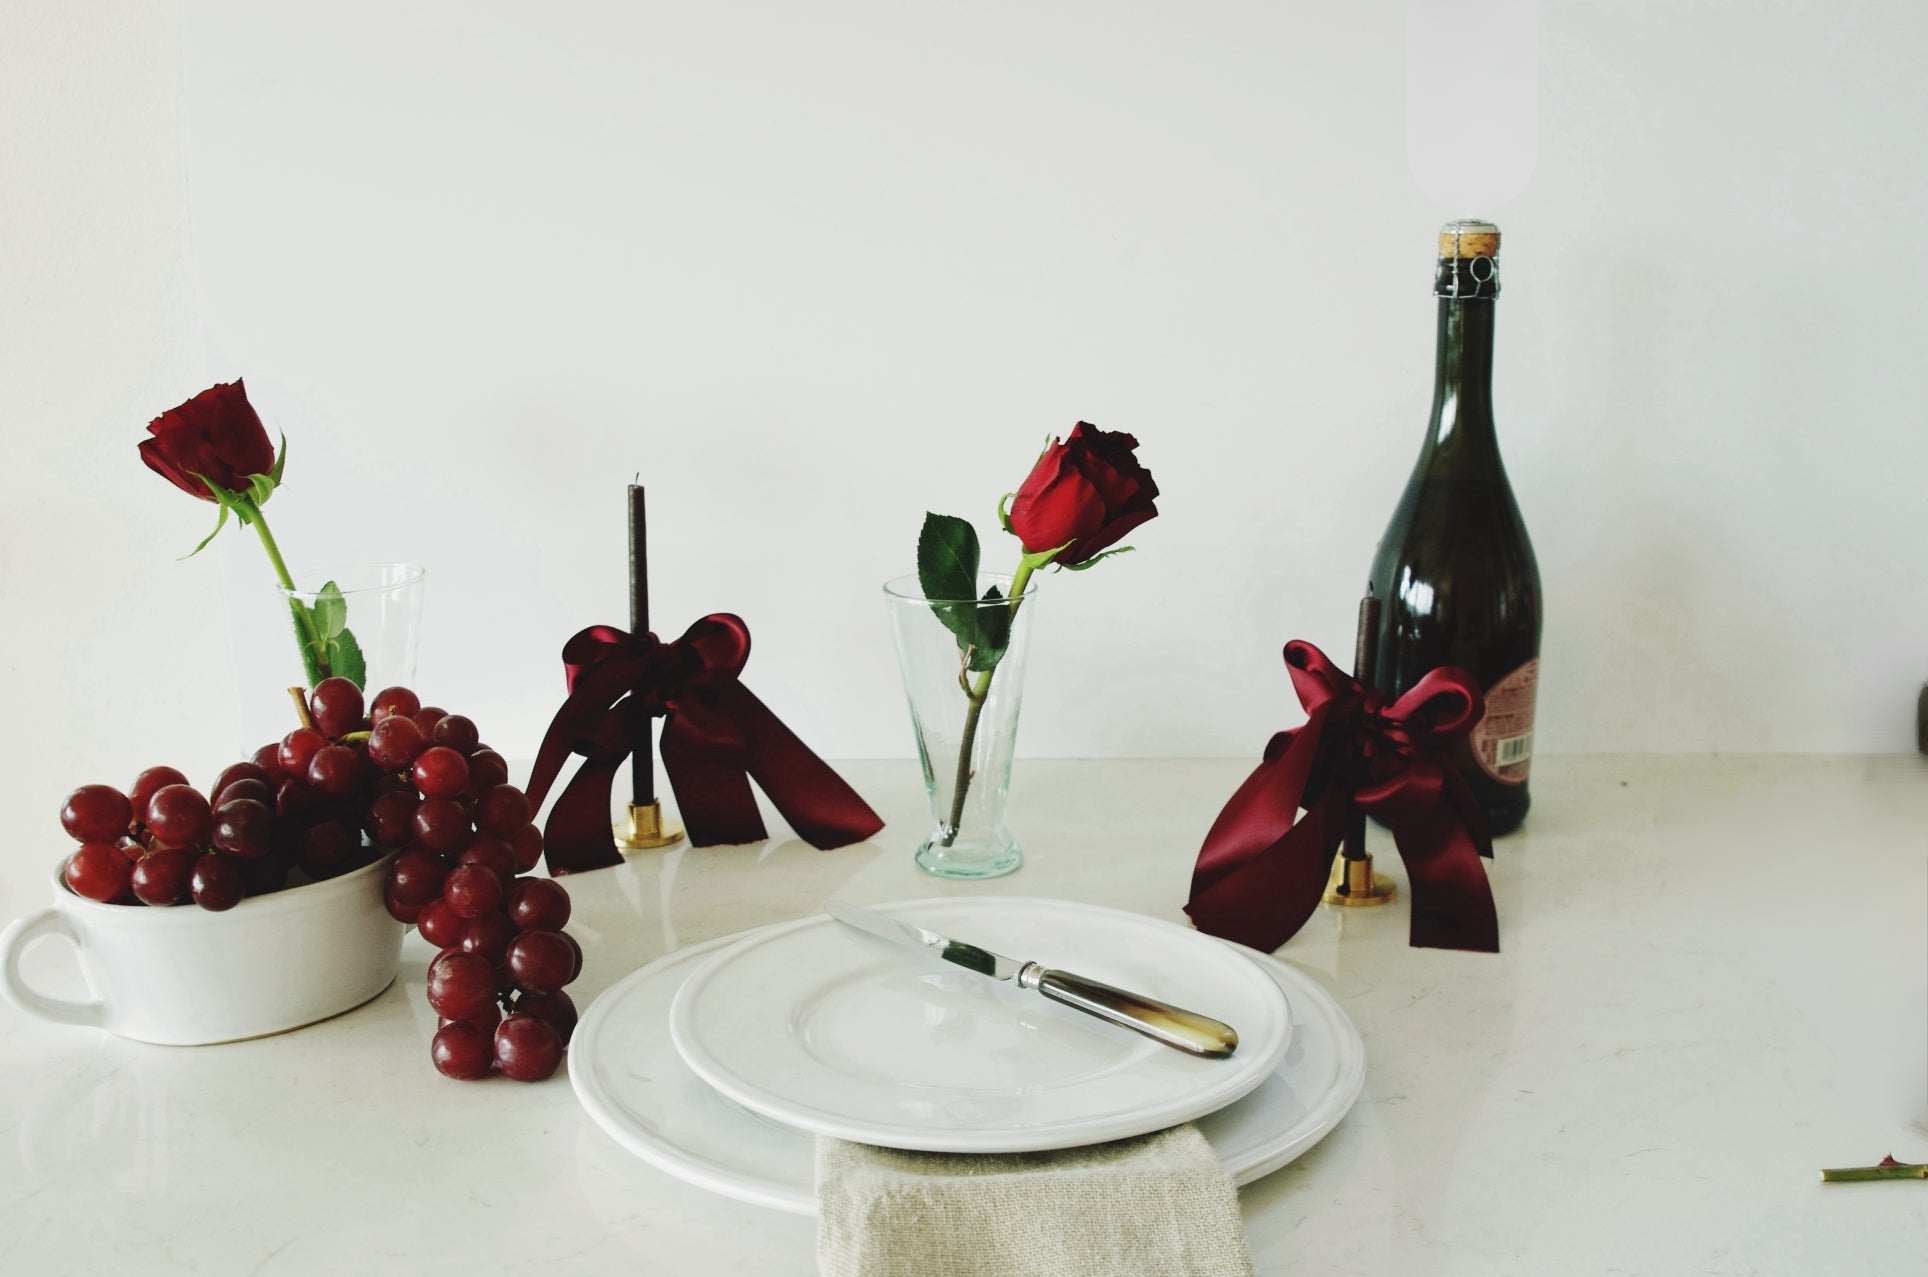 Elegant table setting featuring a cluster of red grapes in a white bowl, a single red rose in a clear glass, and a wine bottle with a dark red ribbon, alongside stacked white plates with silver cutlery on a linen napkin, all on a white surface against a white wall.